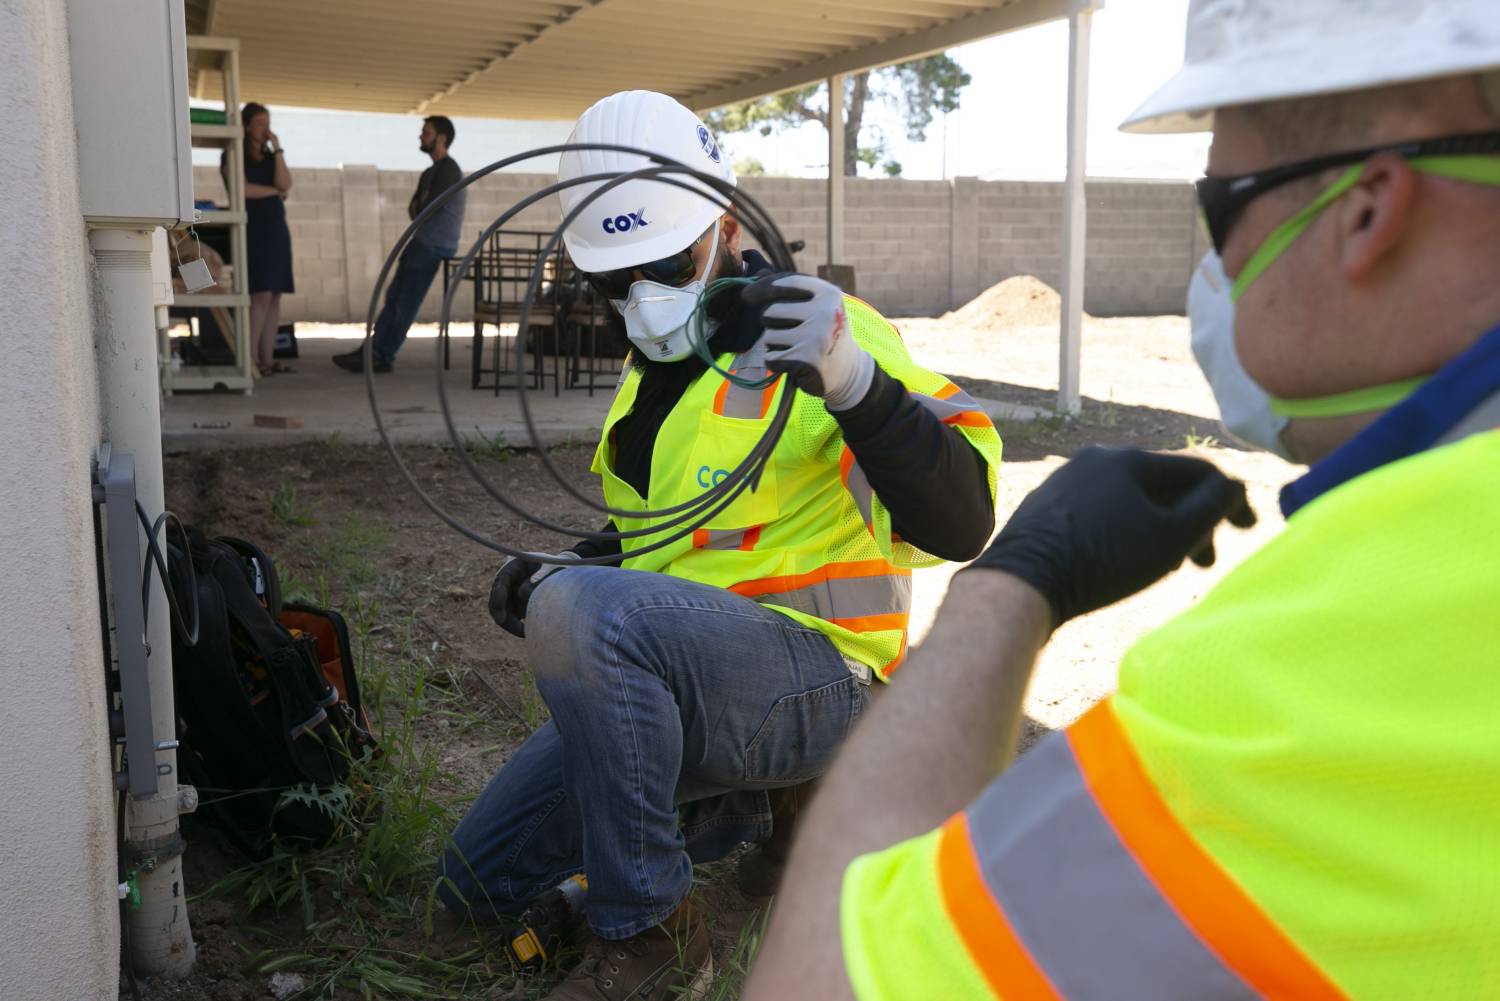 Pablo Barajas (center) and Brandon Petersen, both with Cox Communications, install internet at the Phoenix home of Tyler and Alex Palmer (background) on April 15, 2020. Cox Communications installers have changed how they do their jobs and avoid entering customers' homes in almost all situations because of the new coronavirus pandemic. The Palmers moved into their home in mid-March and have been without internet since.Cable Internet Service Coronavirus Covid 19